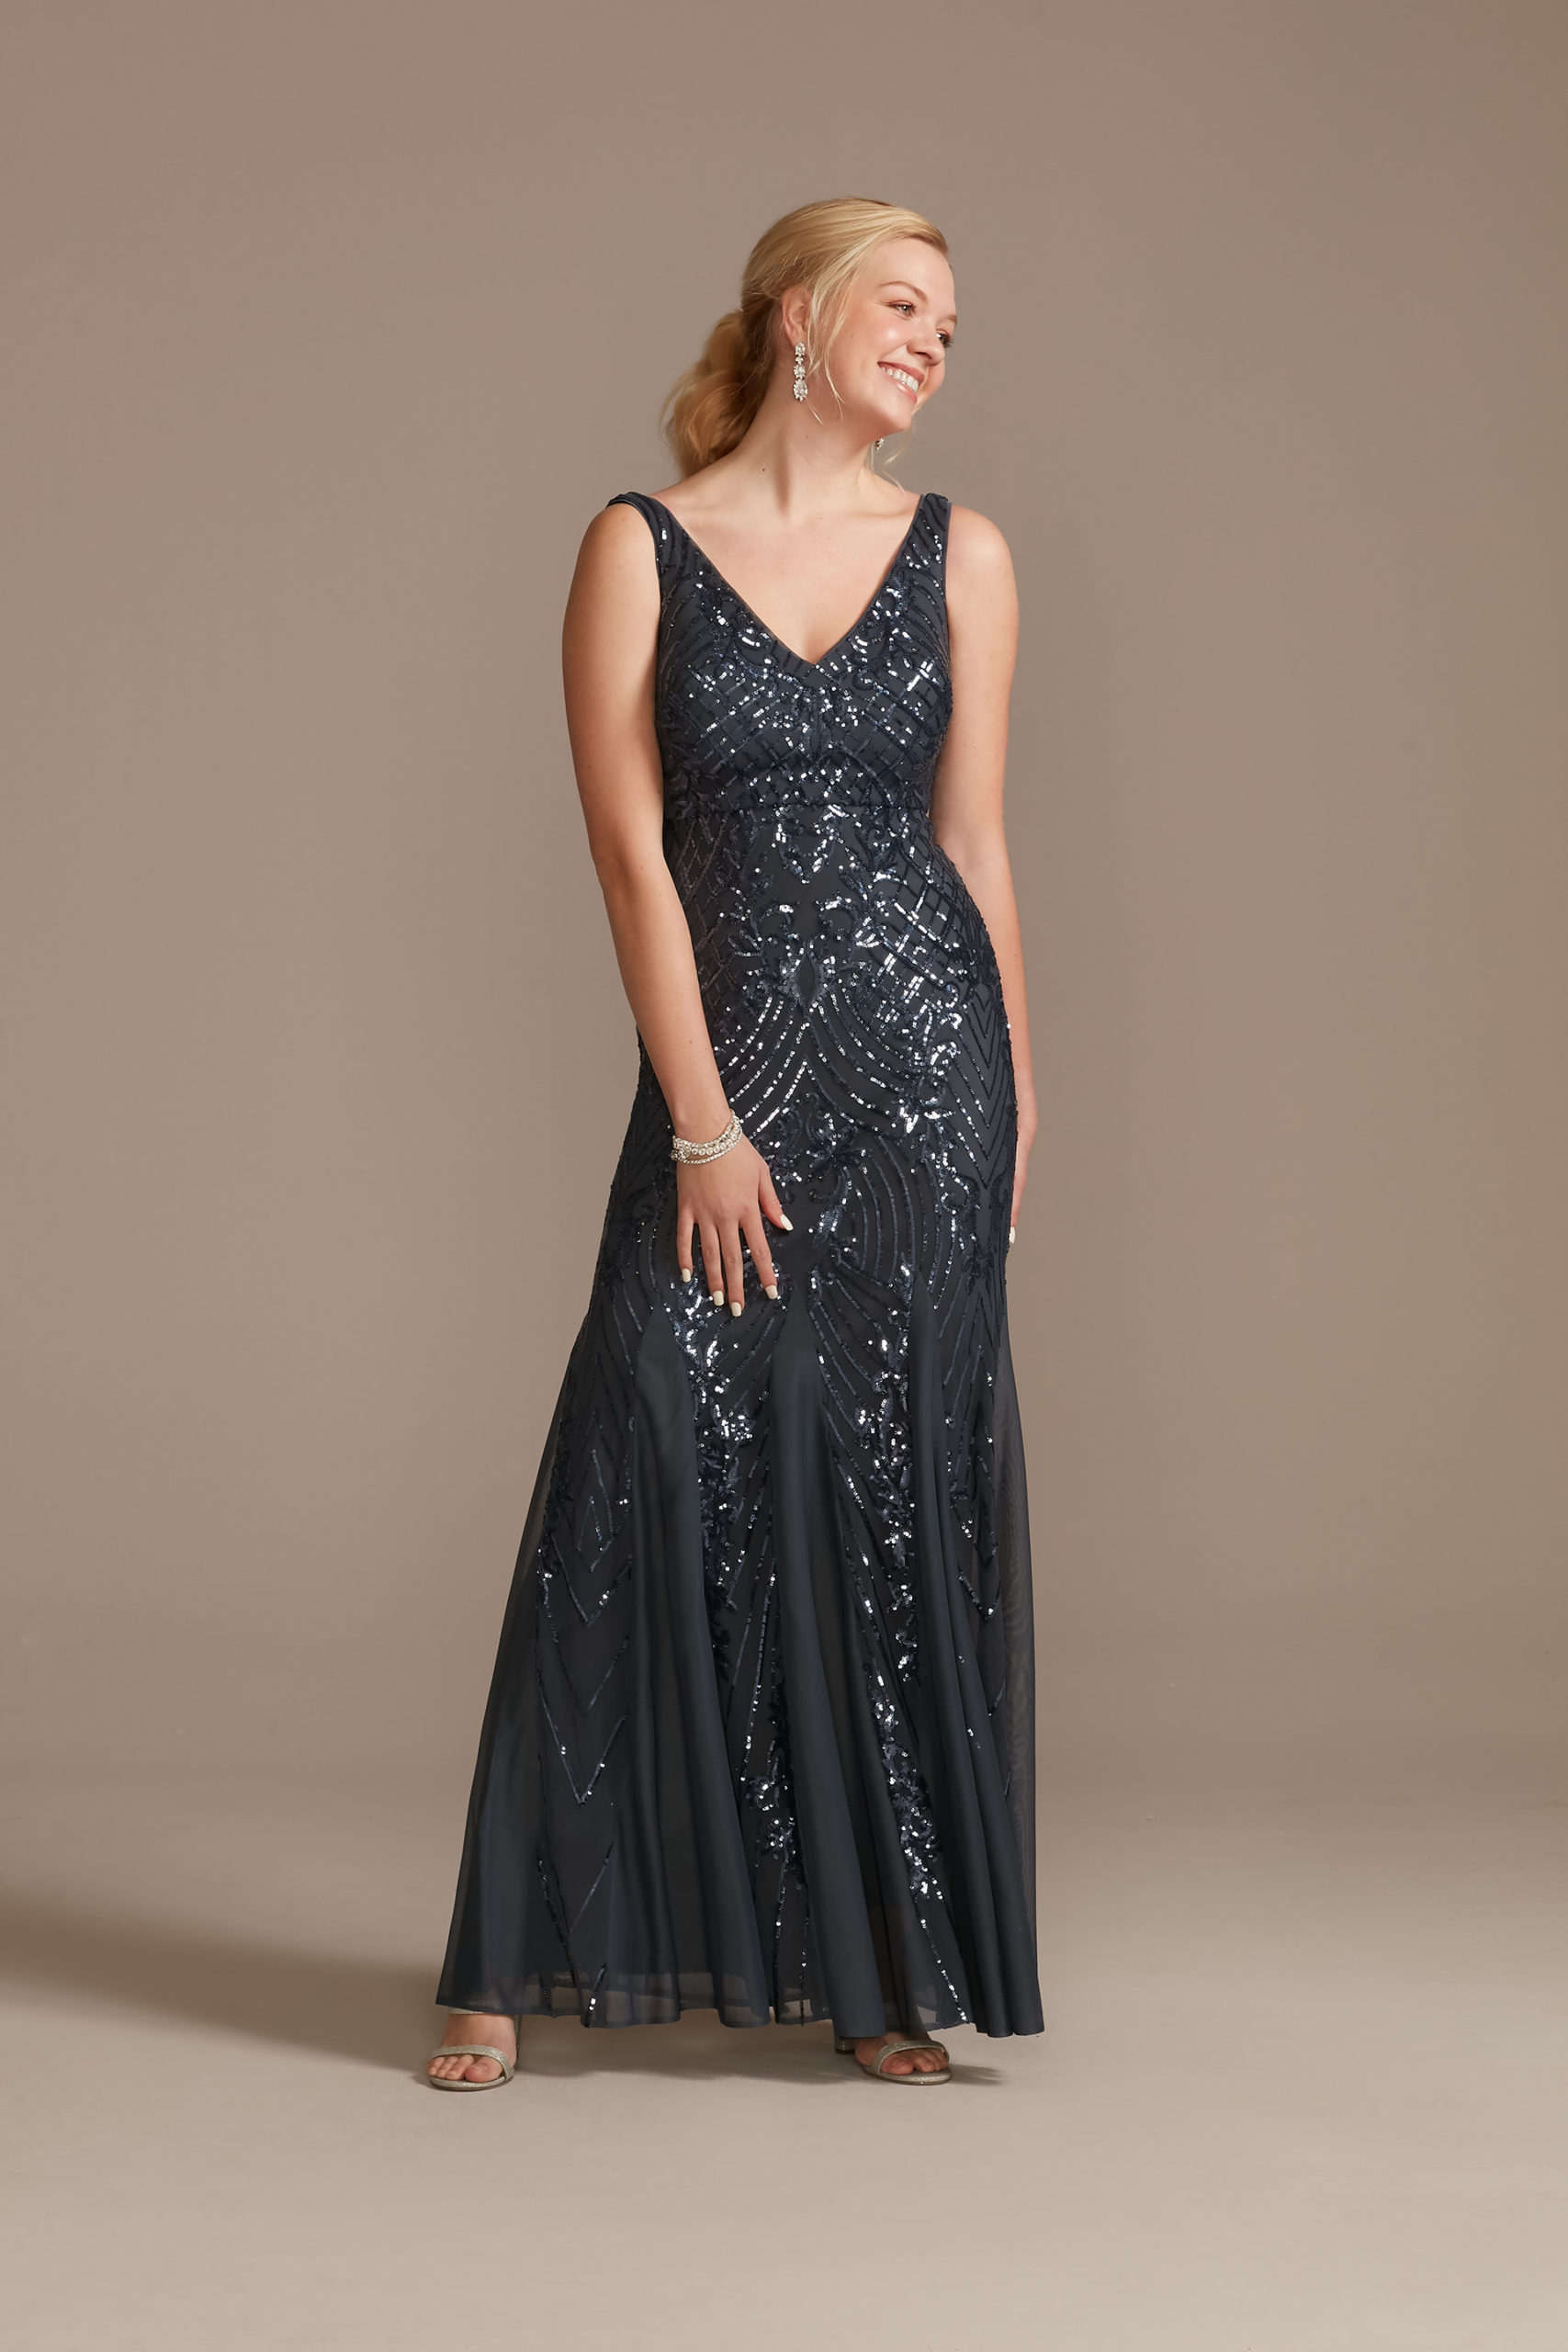 New Year's Eve Party Dresses By Occasion - New Year's Eve Dresses